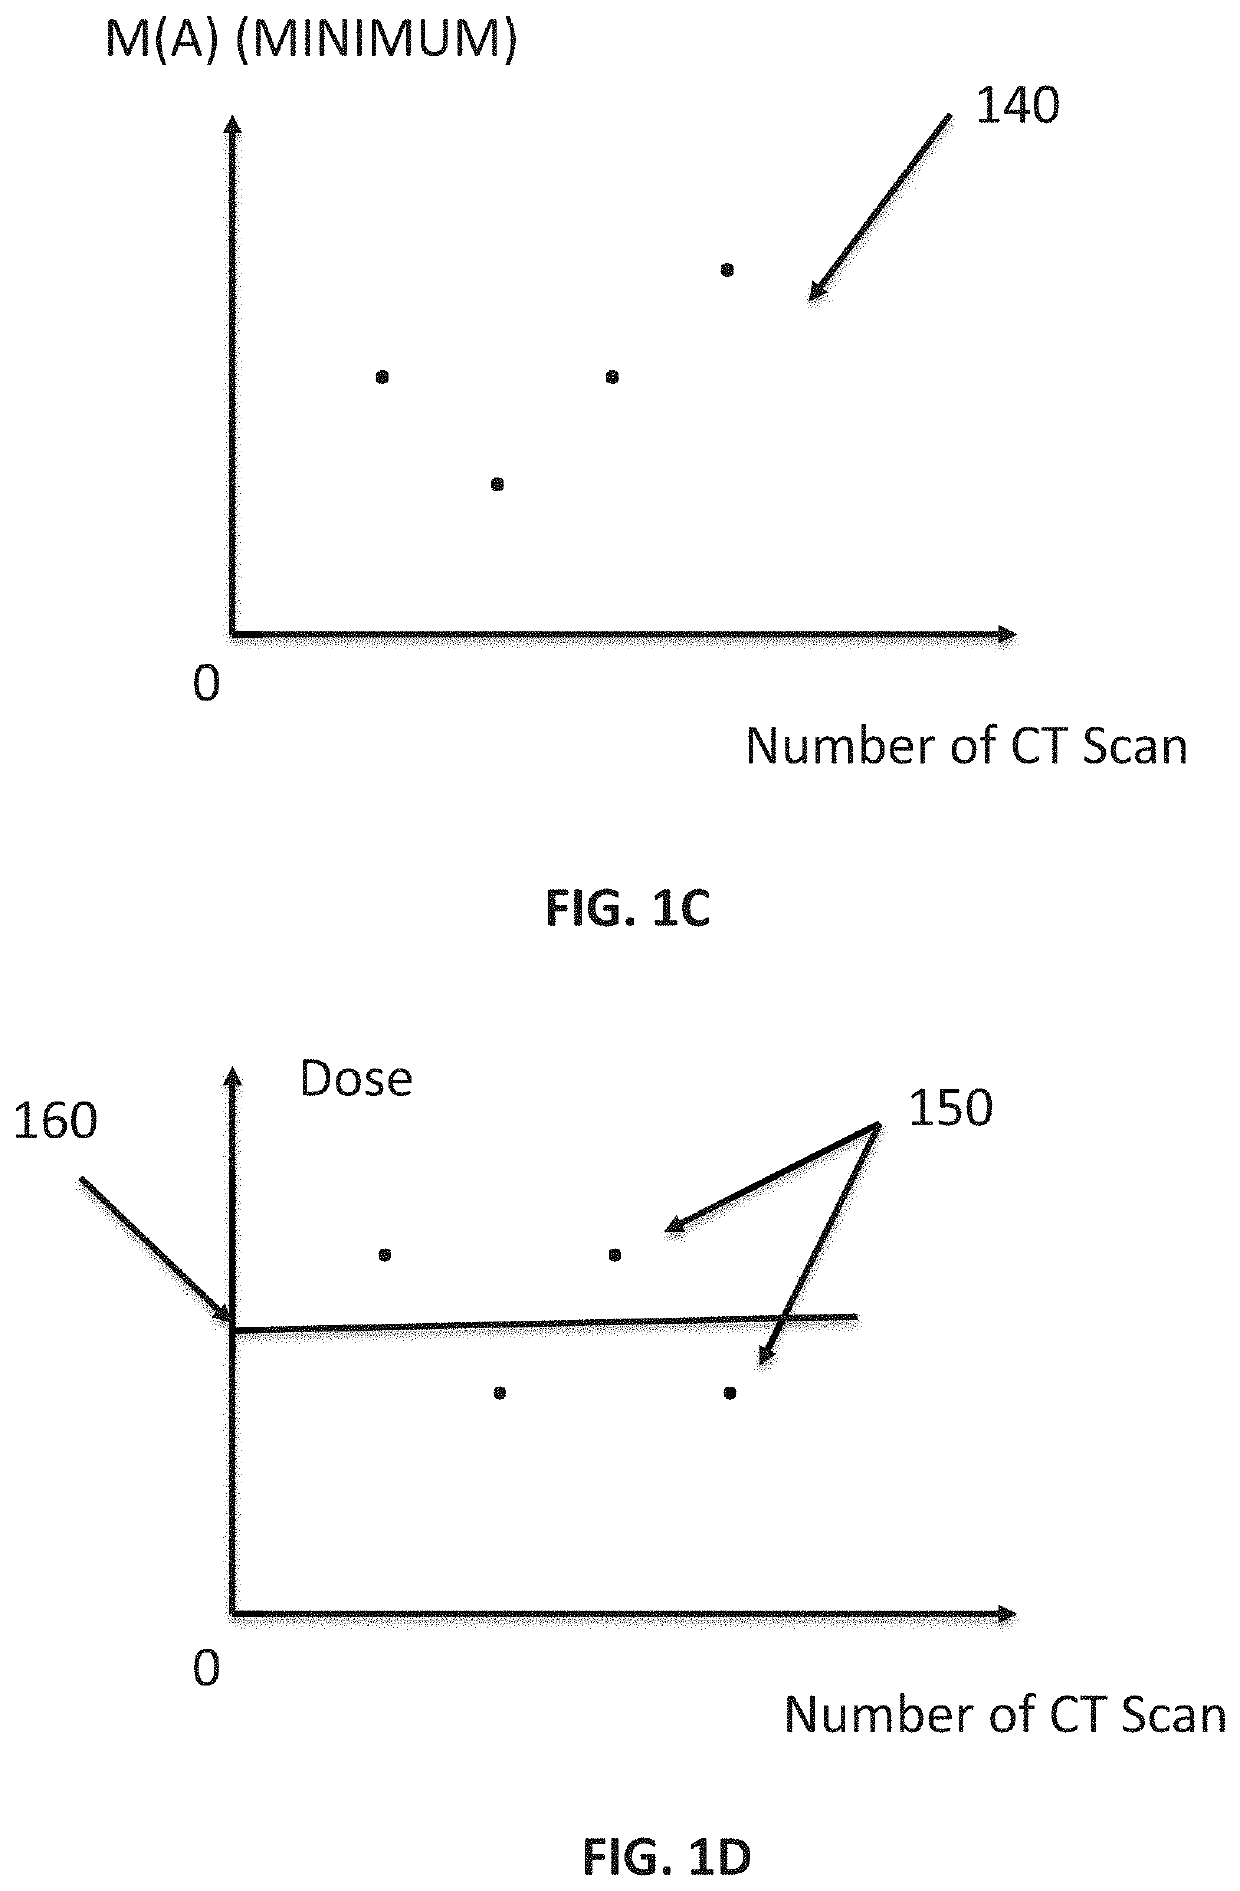 Calibration of radiation therapy treatment plans for a system